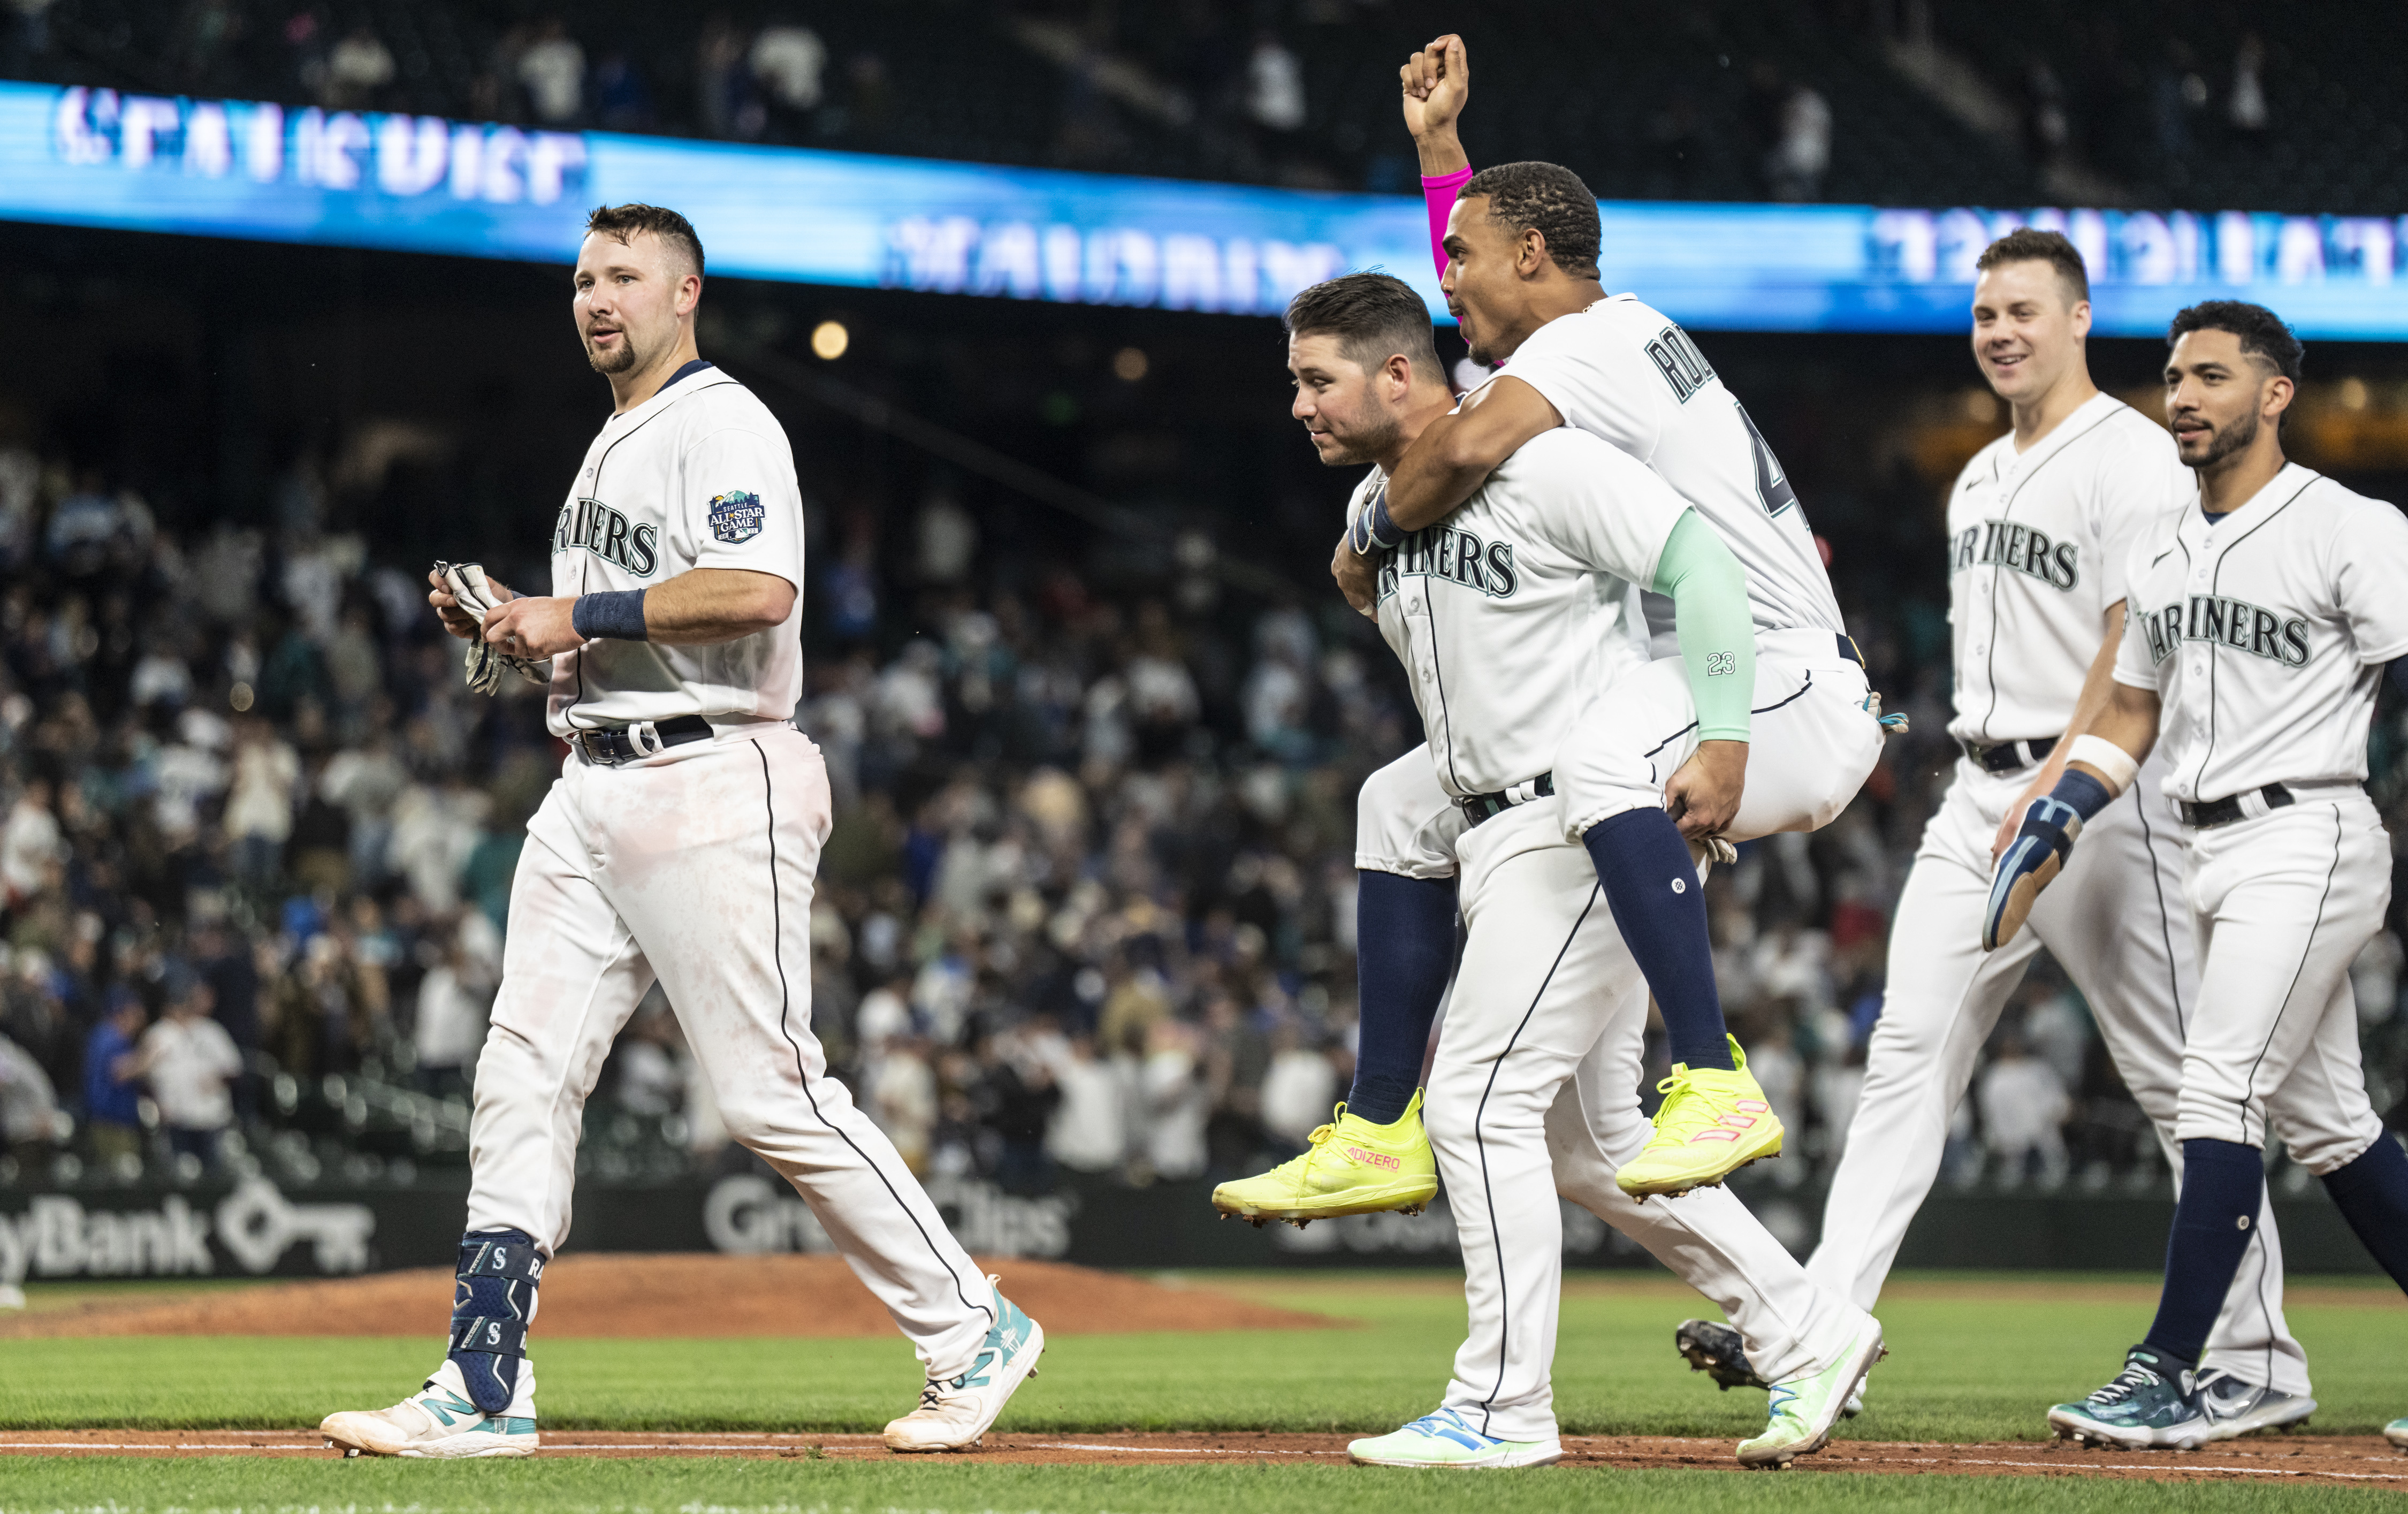 Raleigh's RBI single in 10th gives M's 1-0 win over Yankees